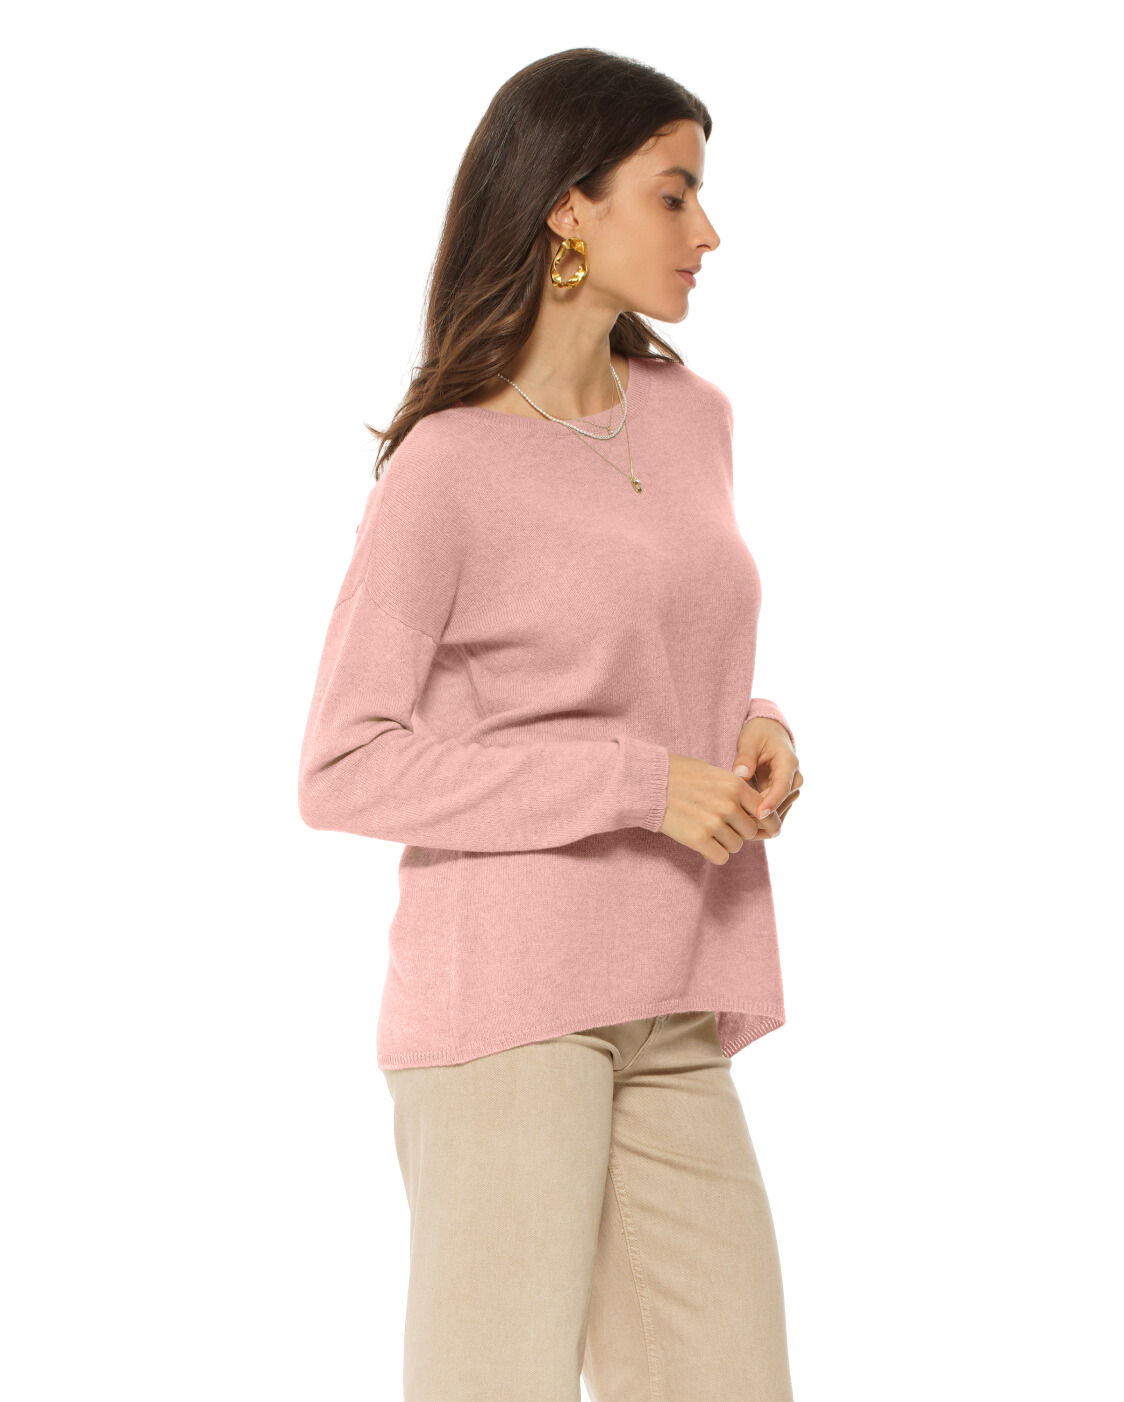 Monticelli Women's Oversized Cashmere Boatneck Sweater Peach 1